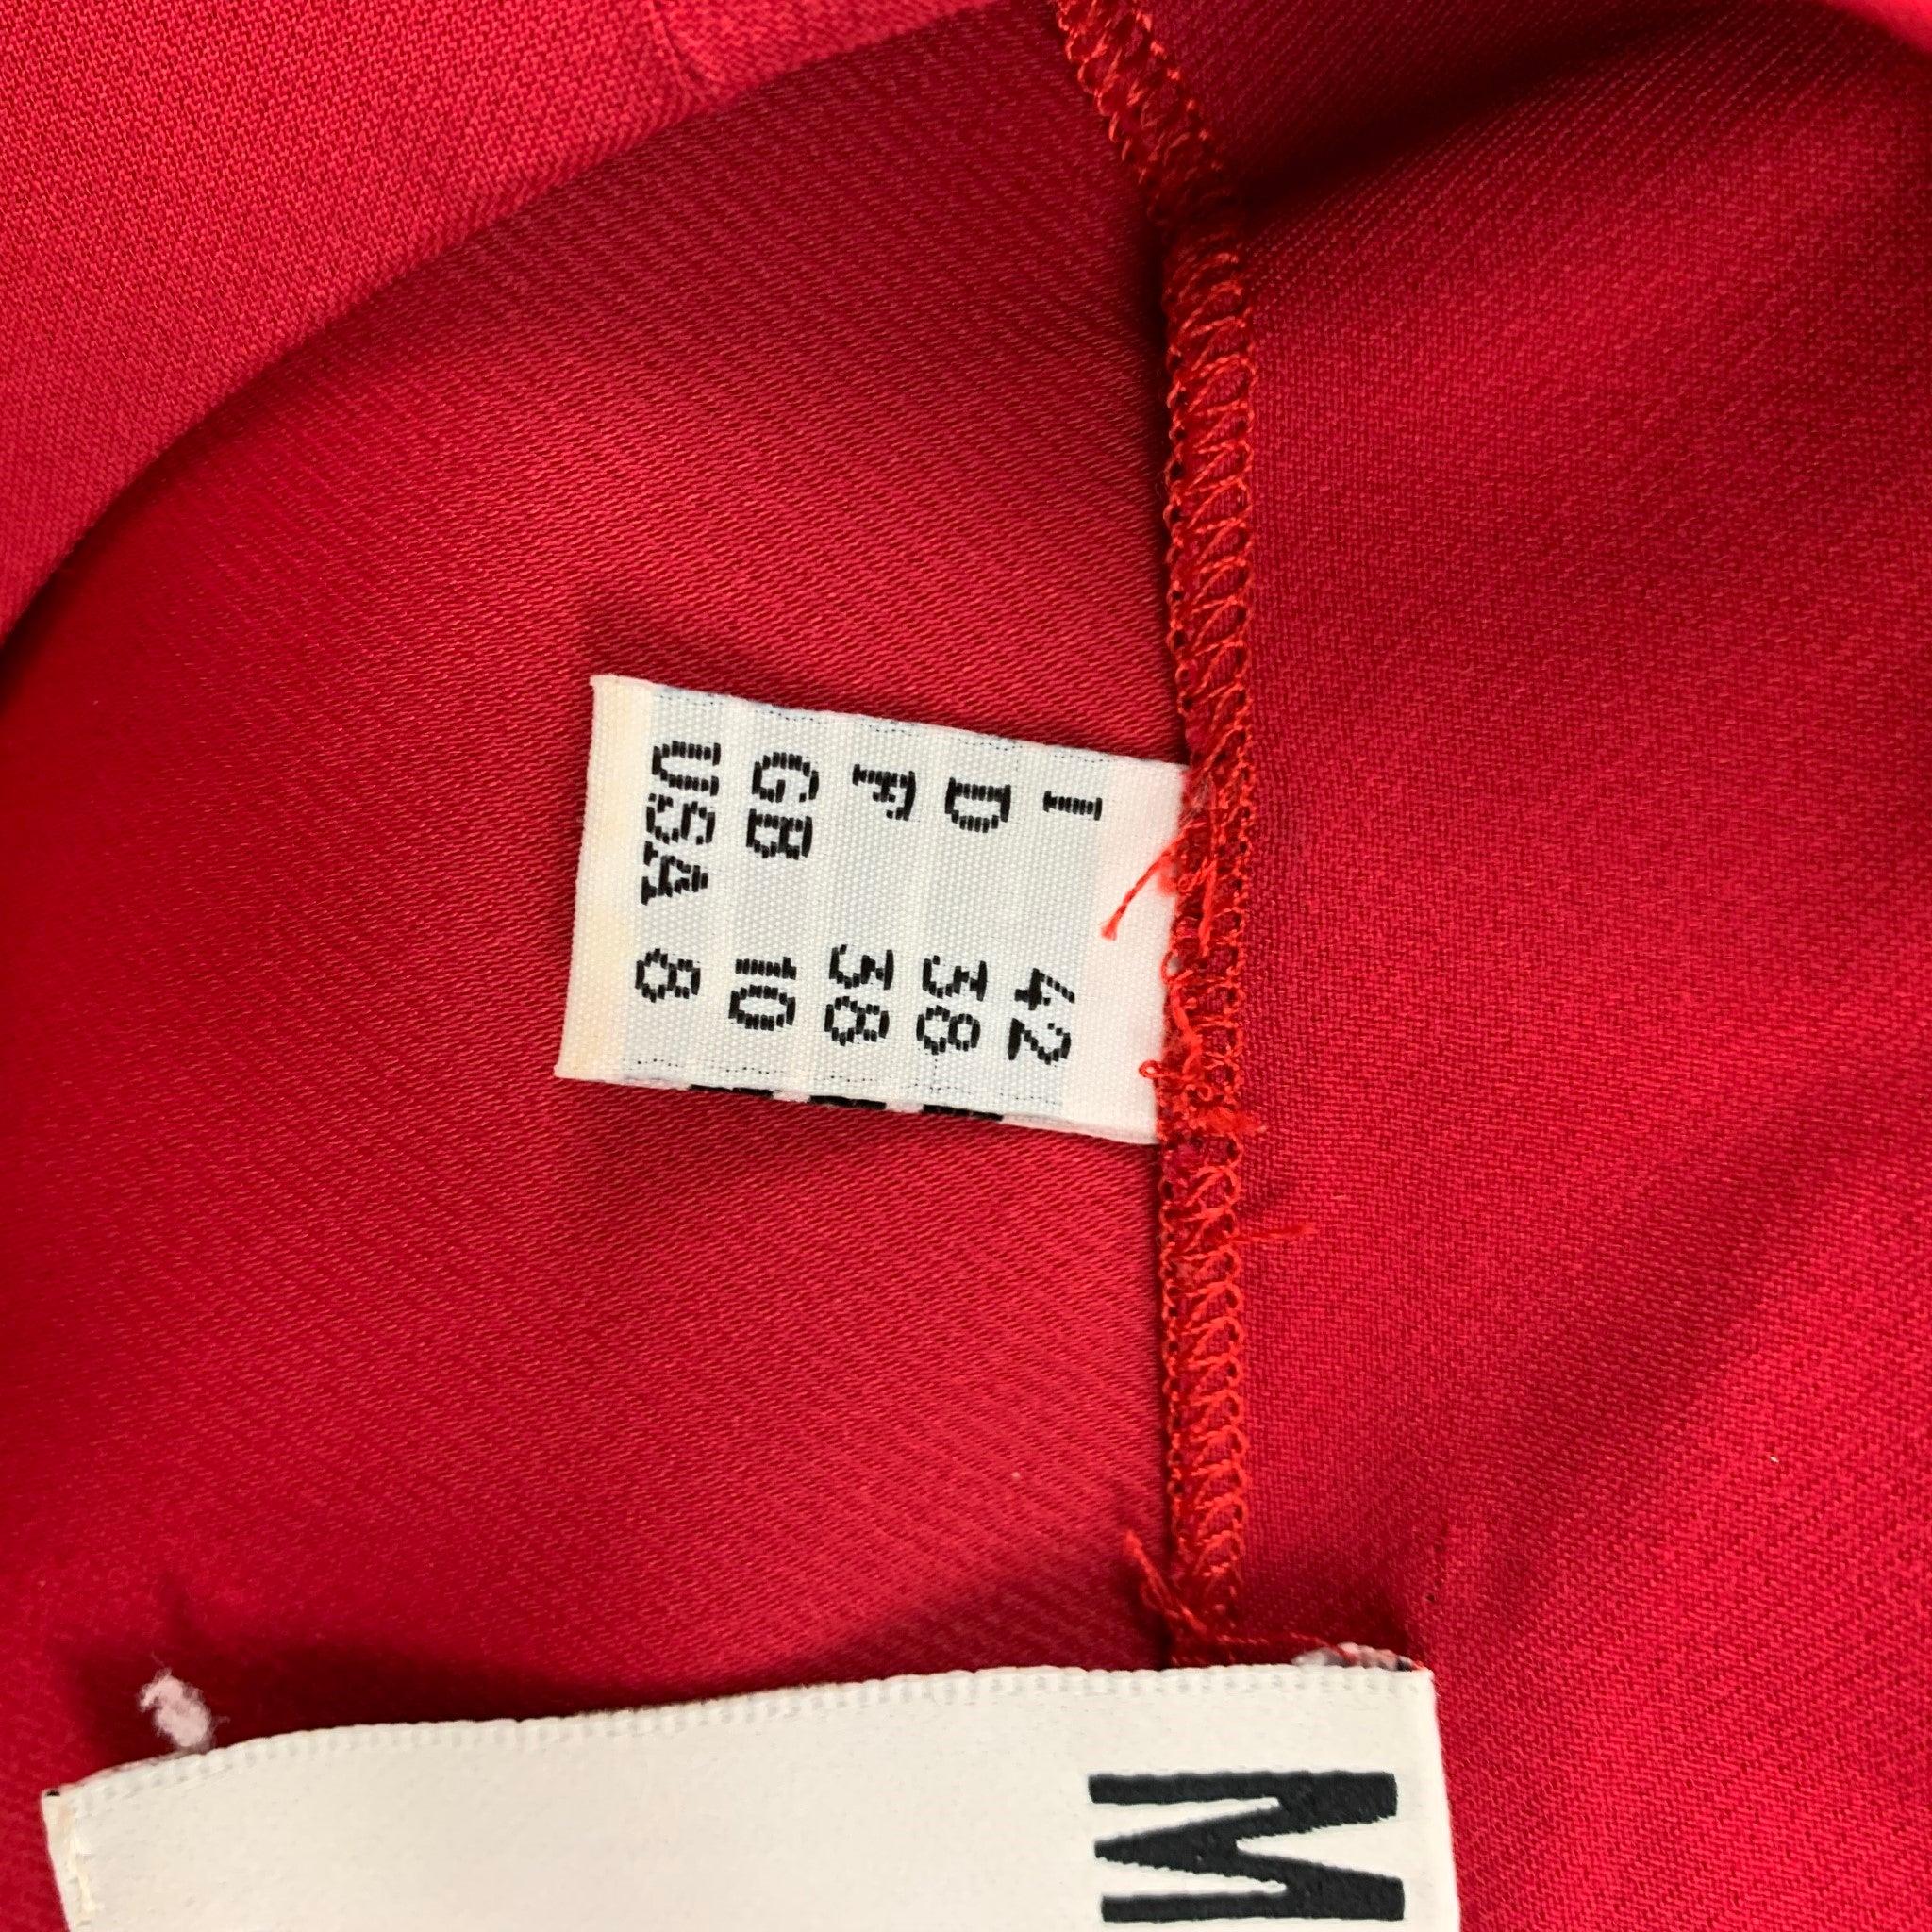 Moschino Couture - Chemisier sans manches en rayonne acétate rouge - Taille 8 en vente 1